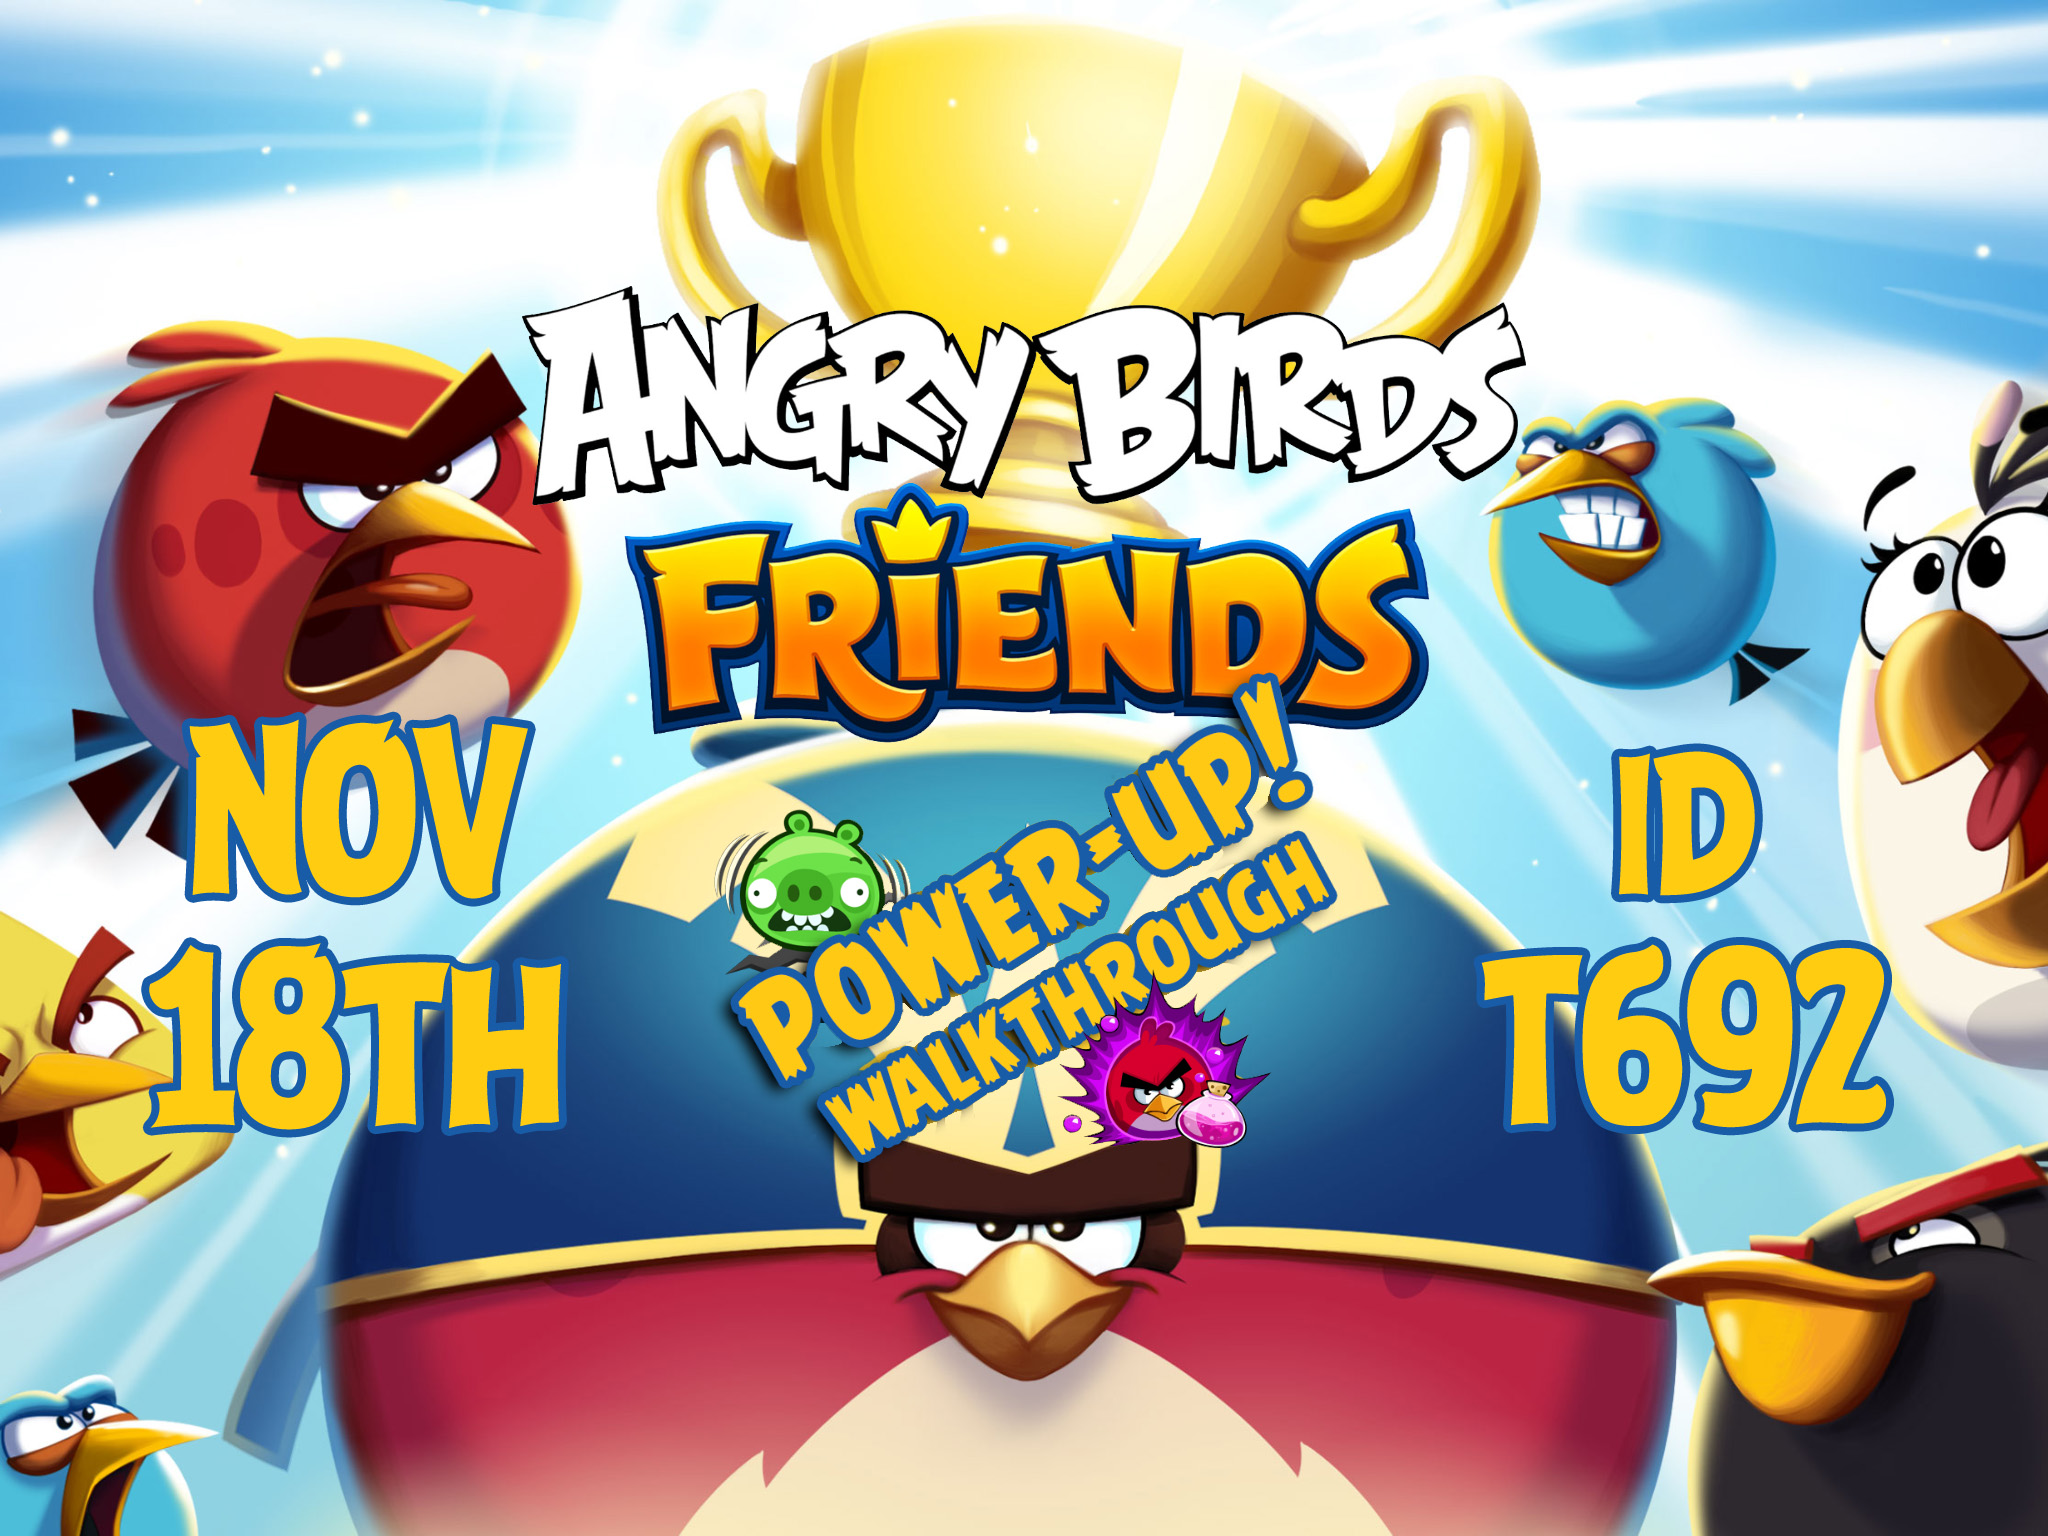 Angry-Birds-Friends-Tournament-T692-Feature-Image-PU